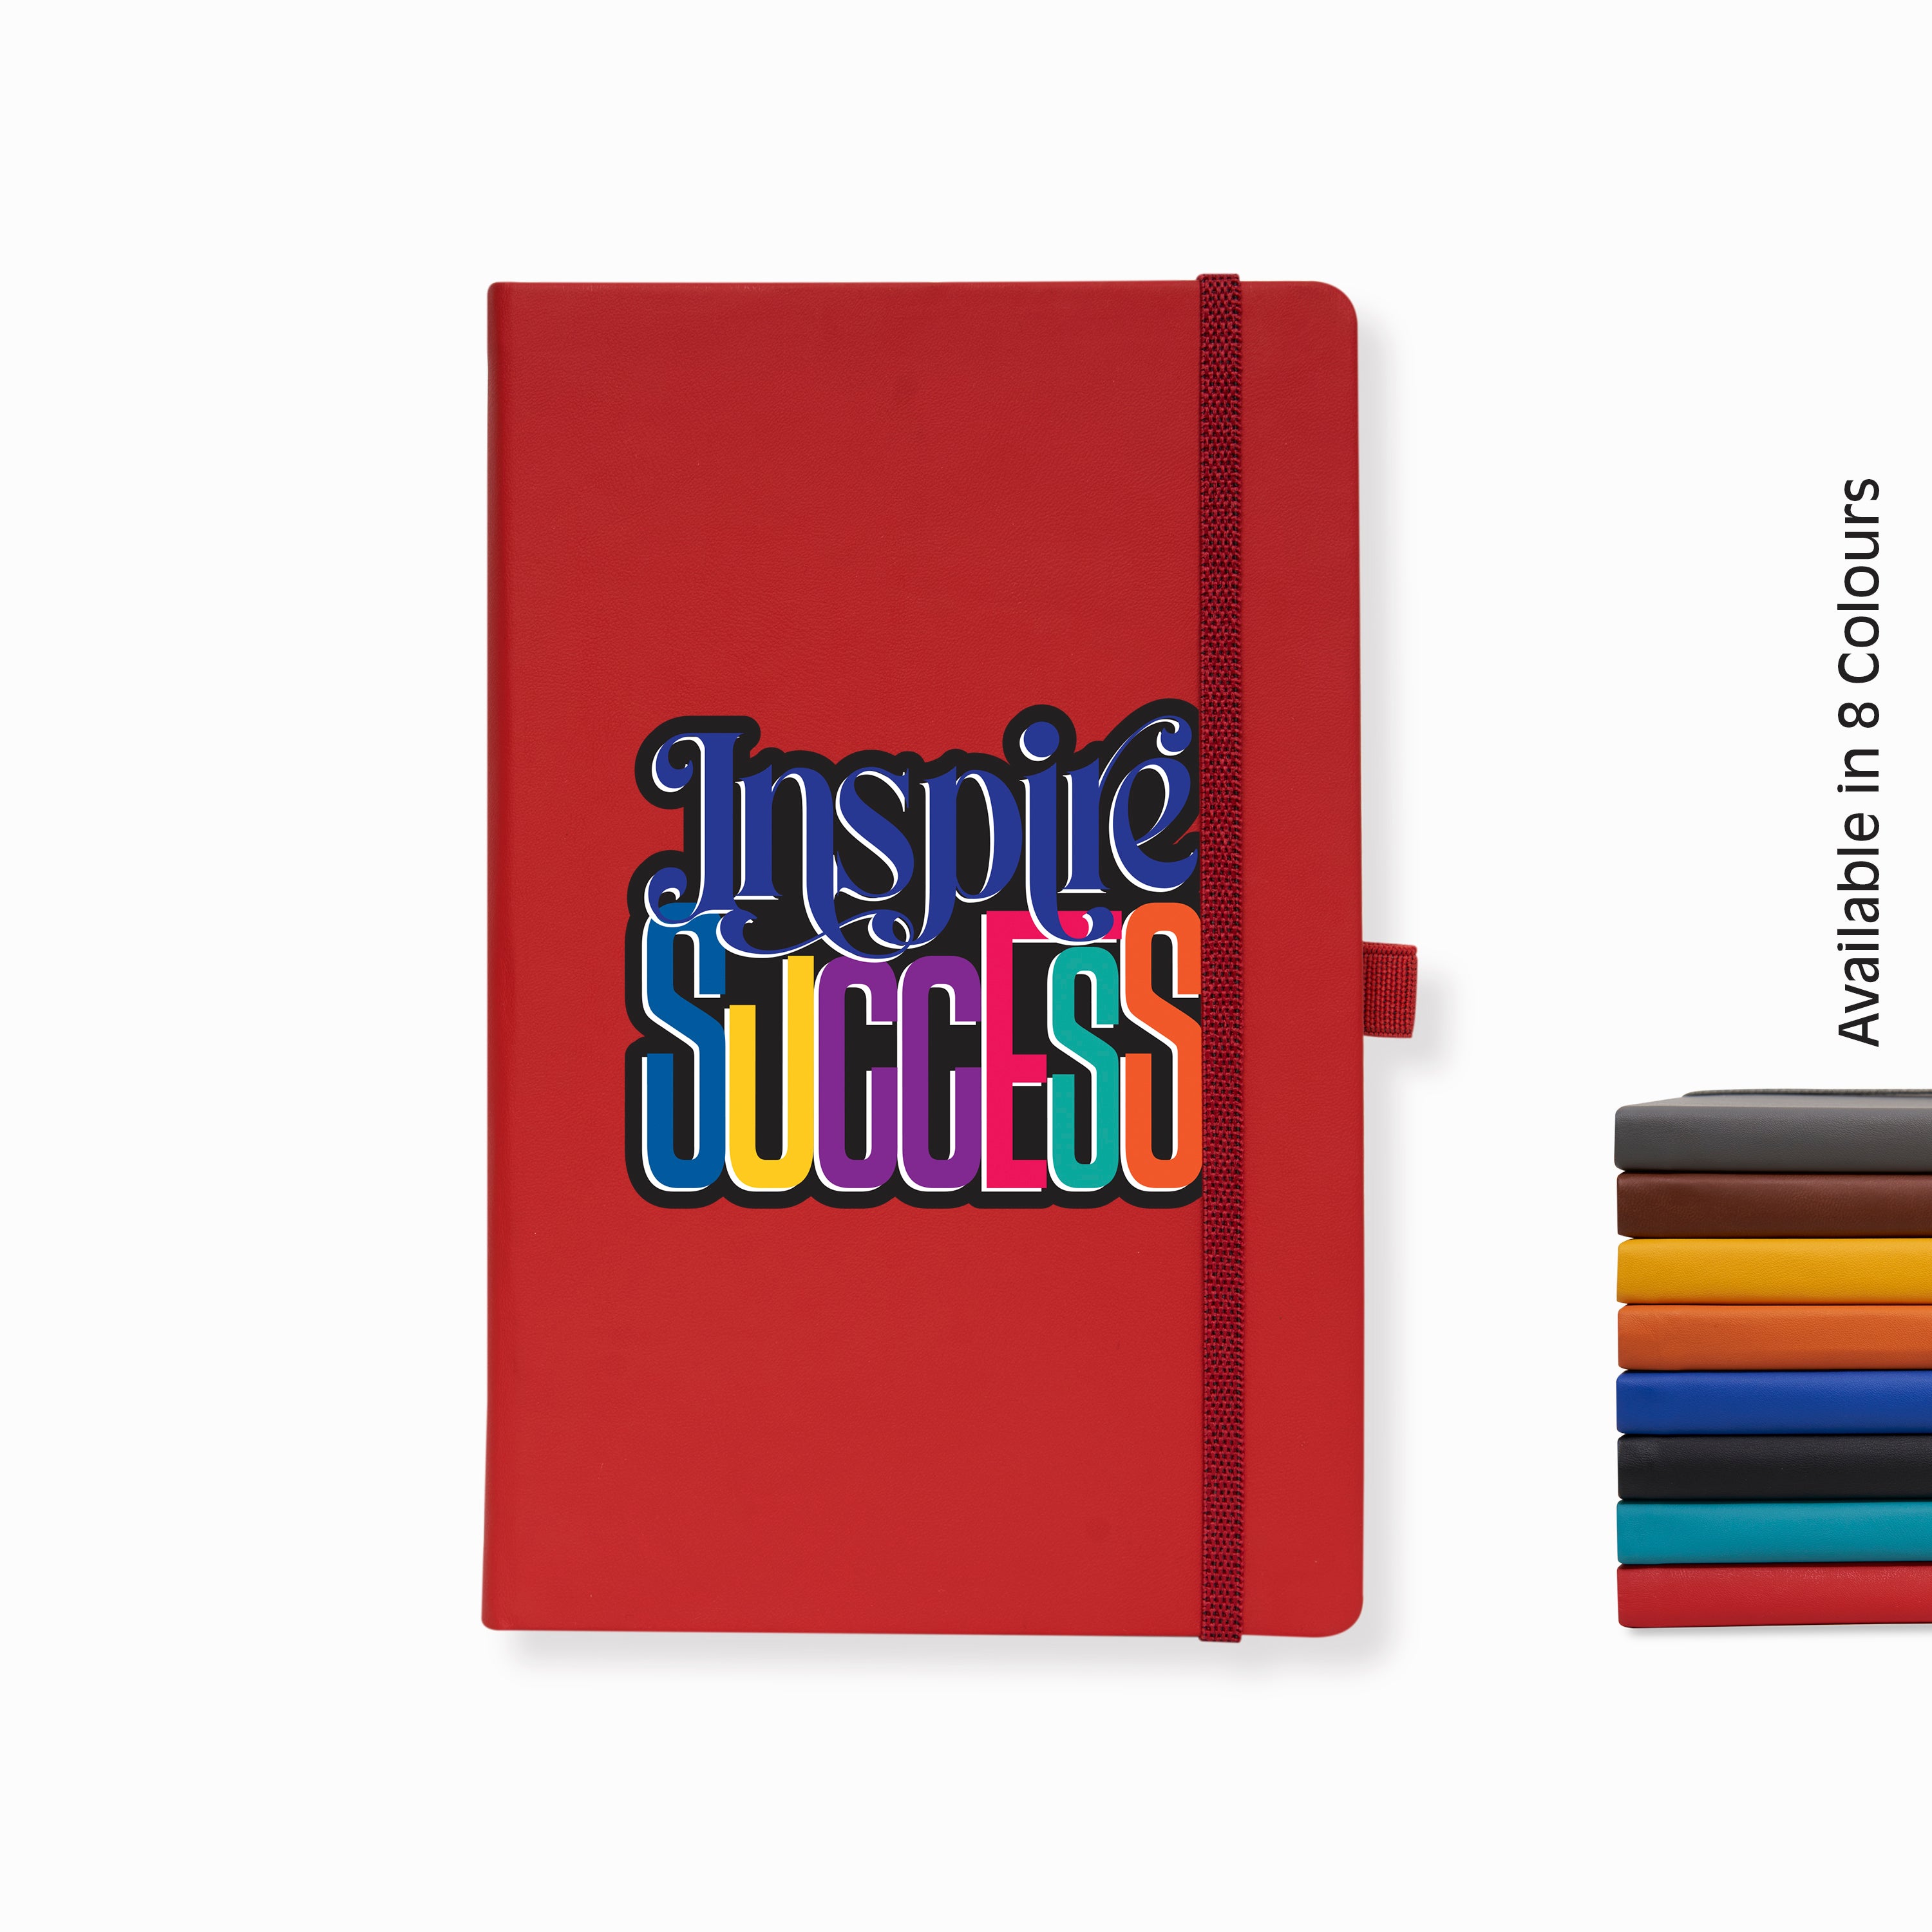 Doodle Pro Series Executive A5 PU Leather Hardbound Ruled Red Notebook with Pen Loop [Inspire Success]